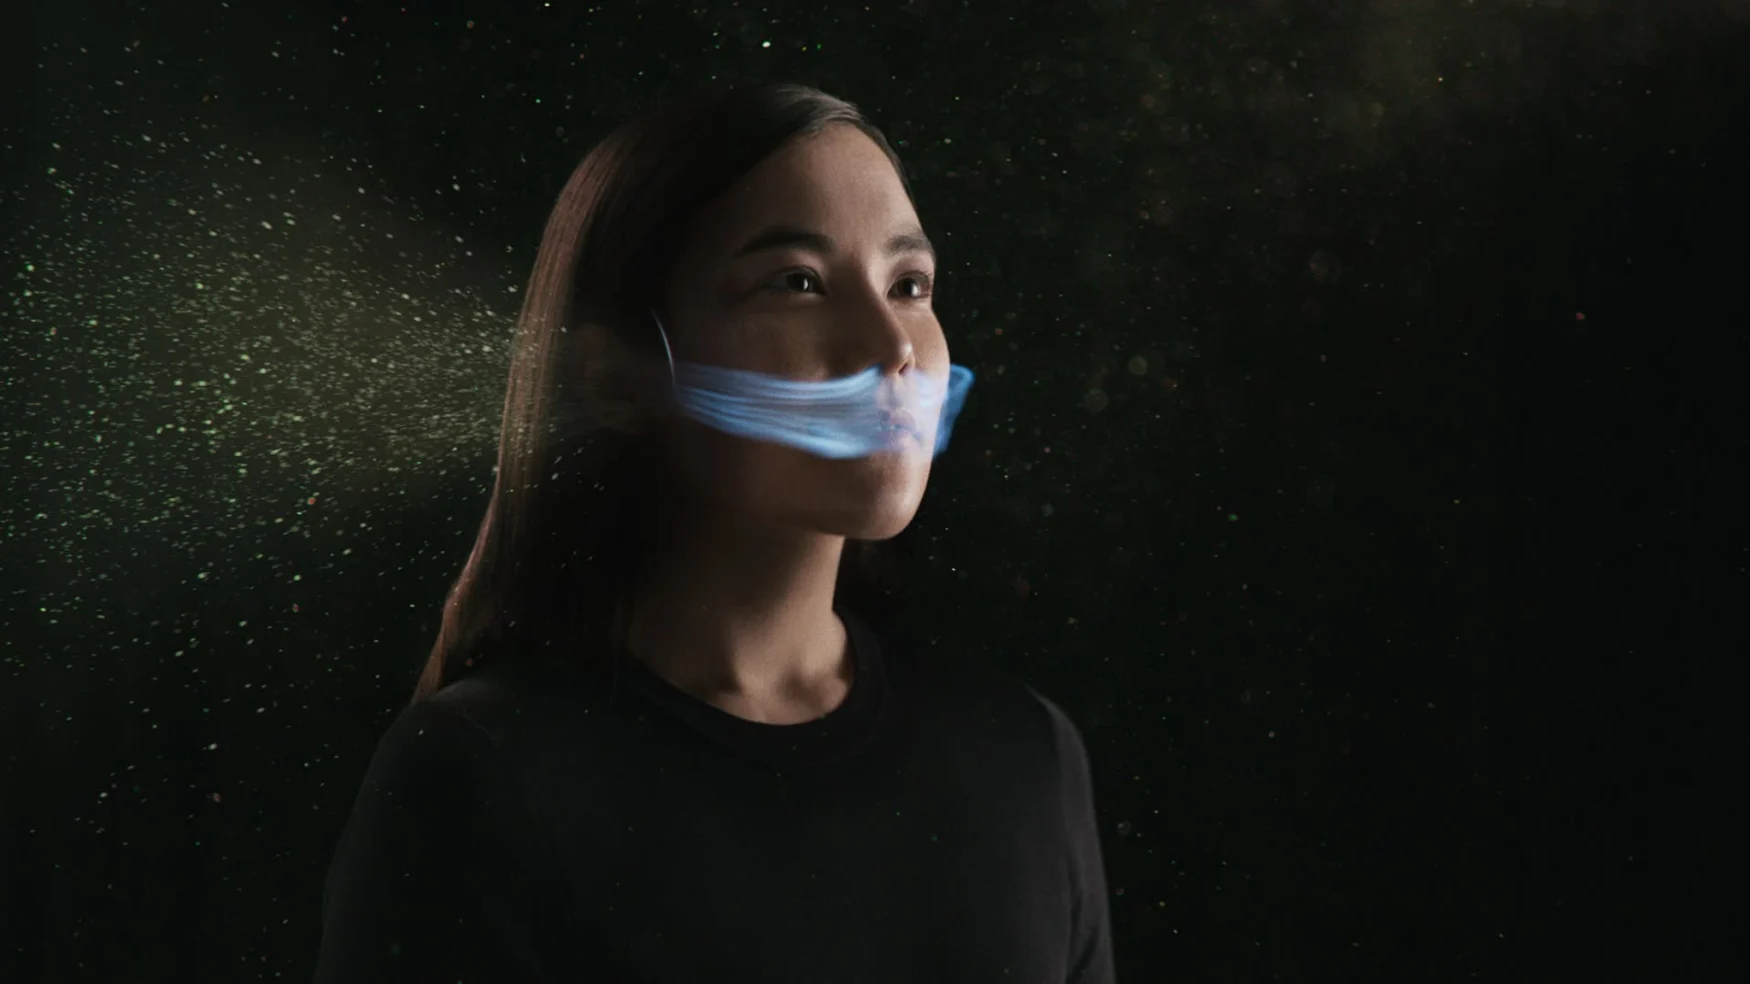 A picture with visualizations depicting how dust particles and air would flow around a person wearing the Dyson Zone.